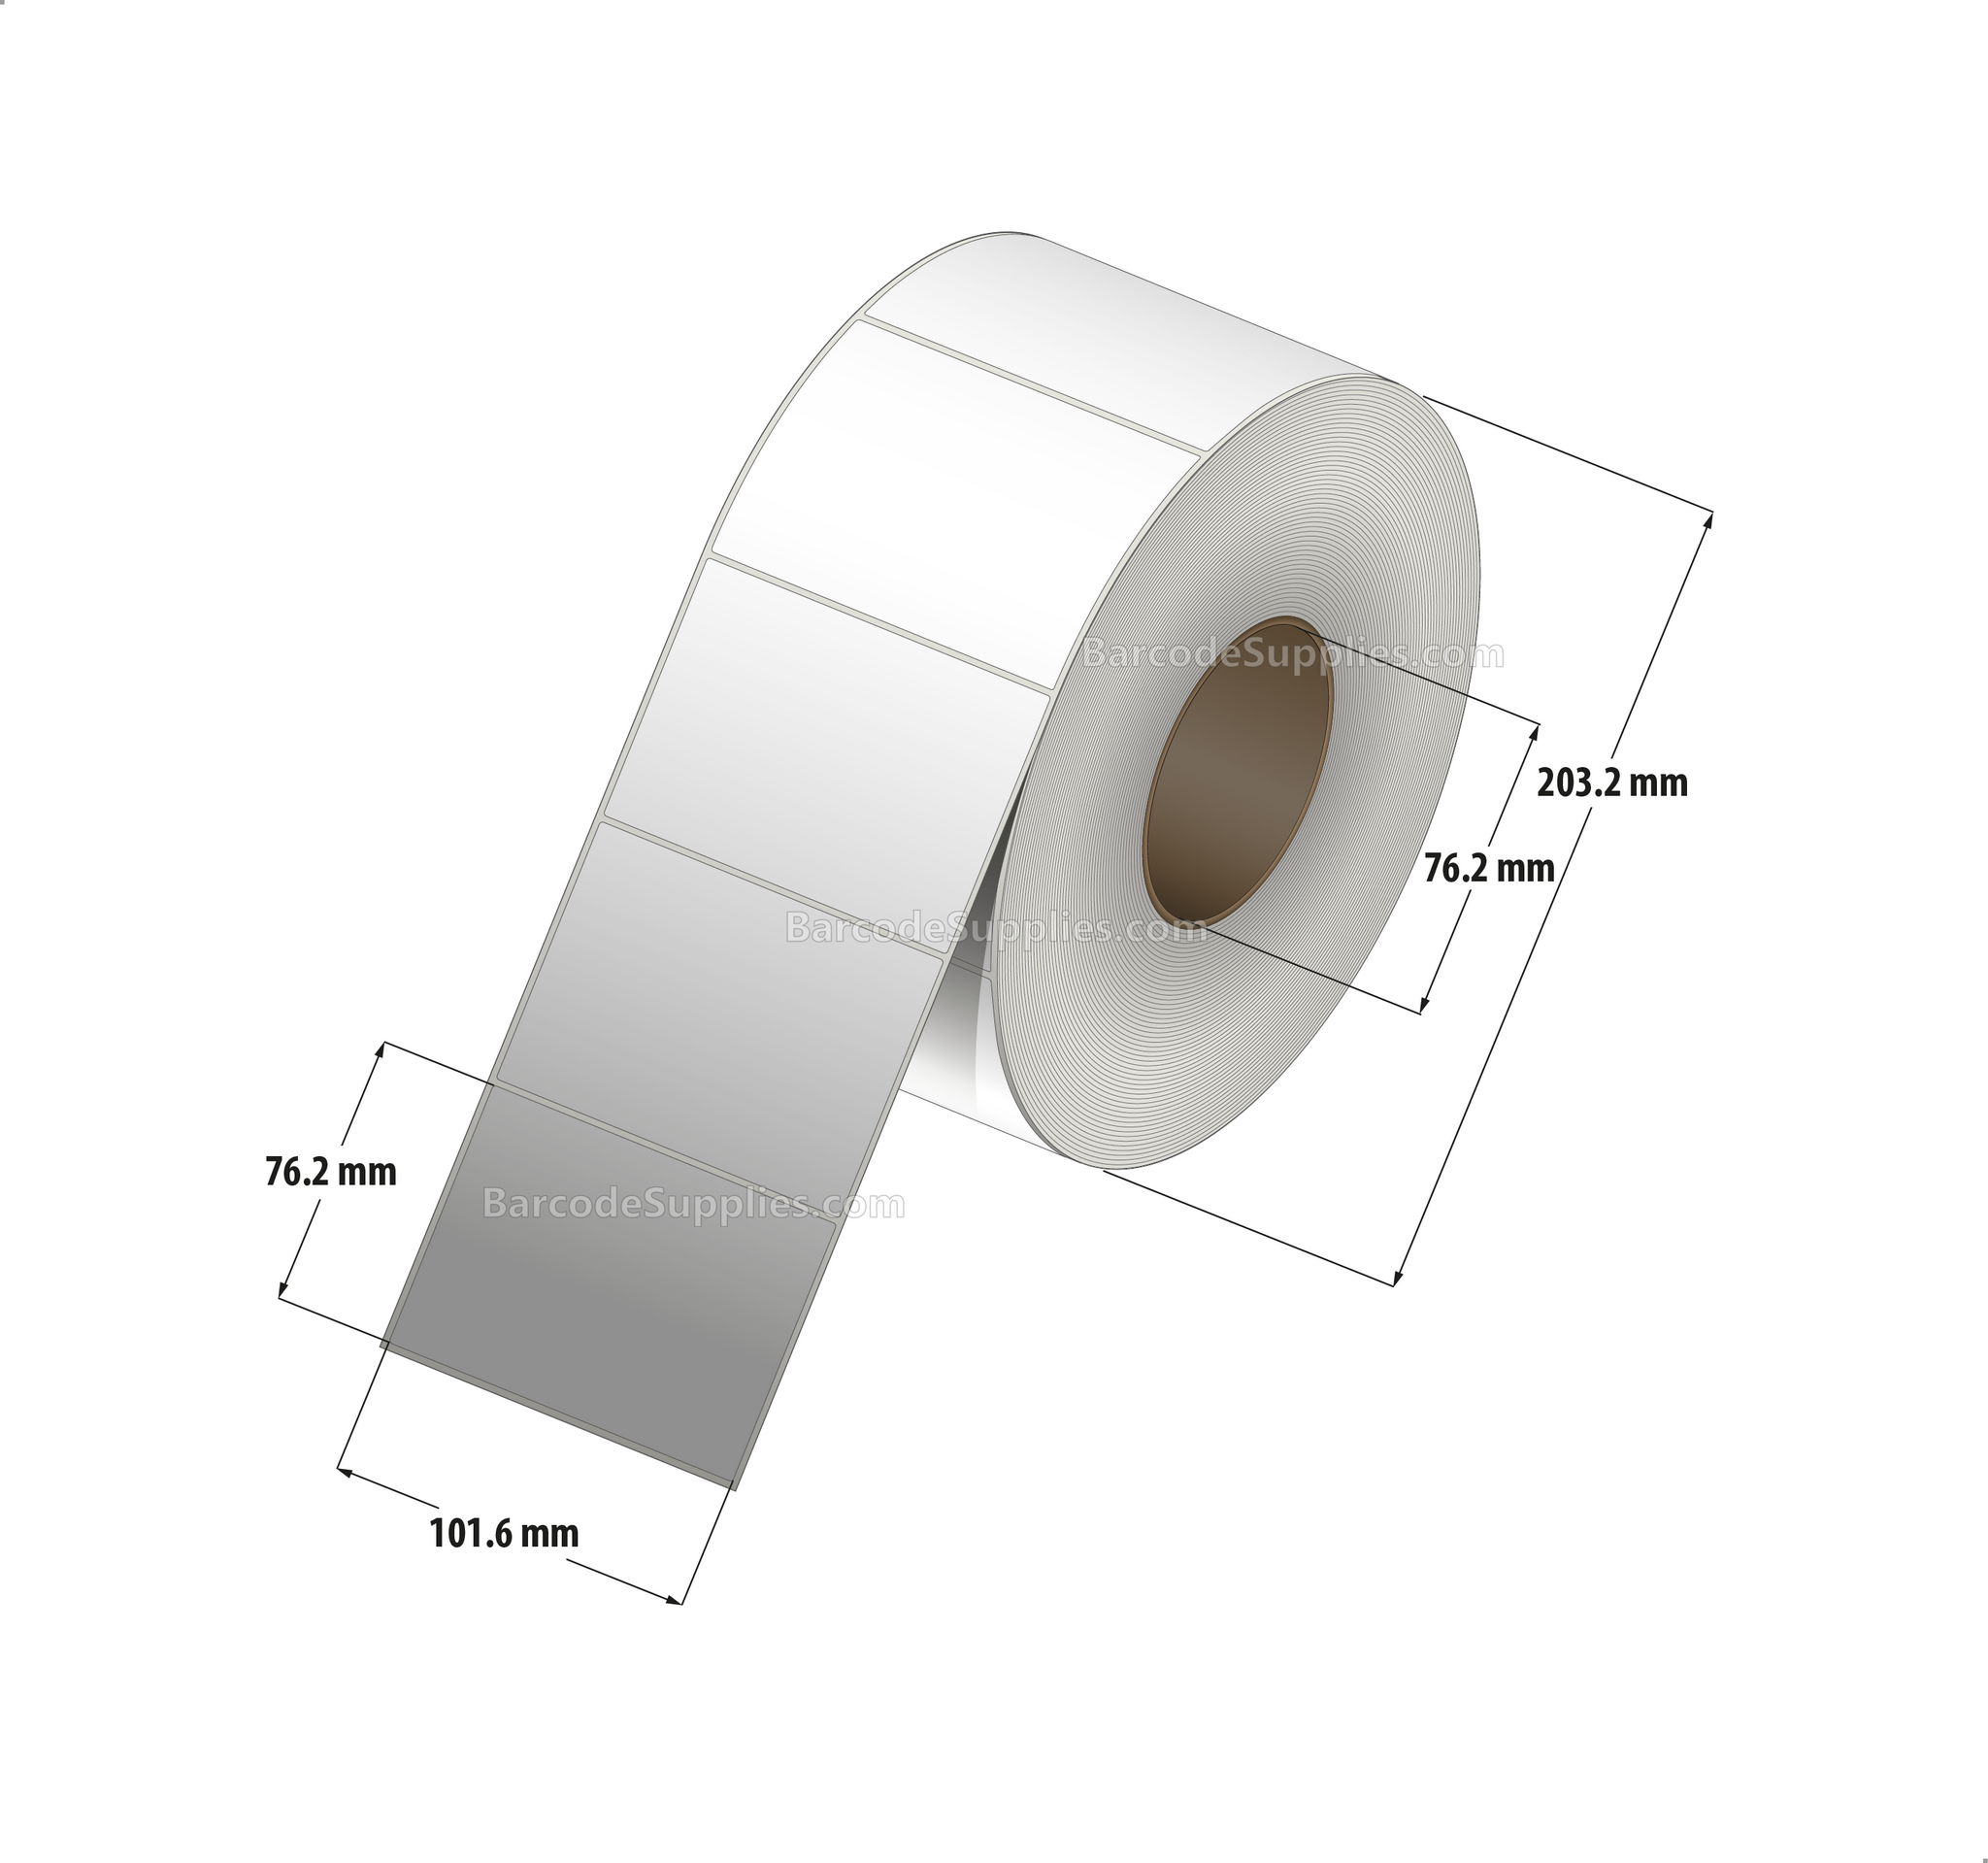 4 x 3 Thermal Transfer White Labels With Permanent Adhesive - No Perforation - 1900 Labels Per Roll - Carton Of 4 Rolls - 7600 Labels Total - MPN: RT-4-3-1900-NP